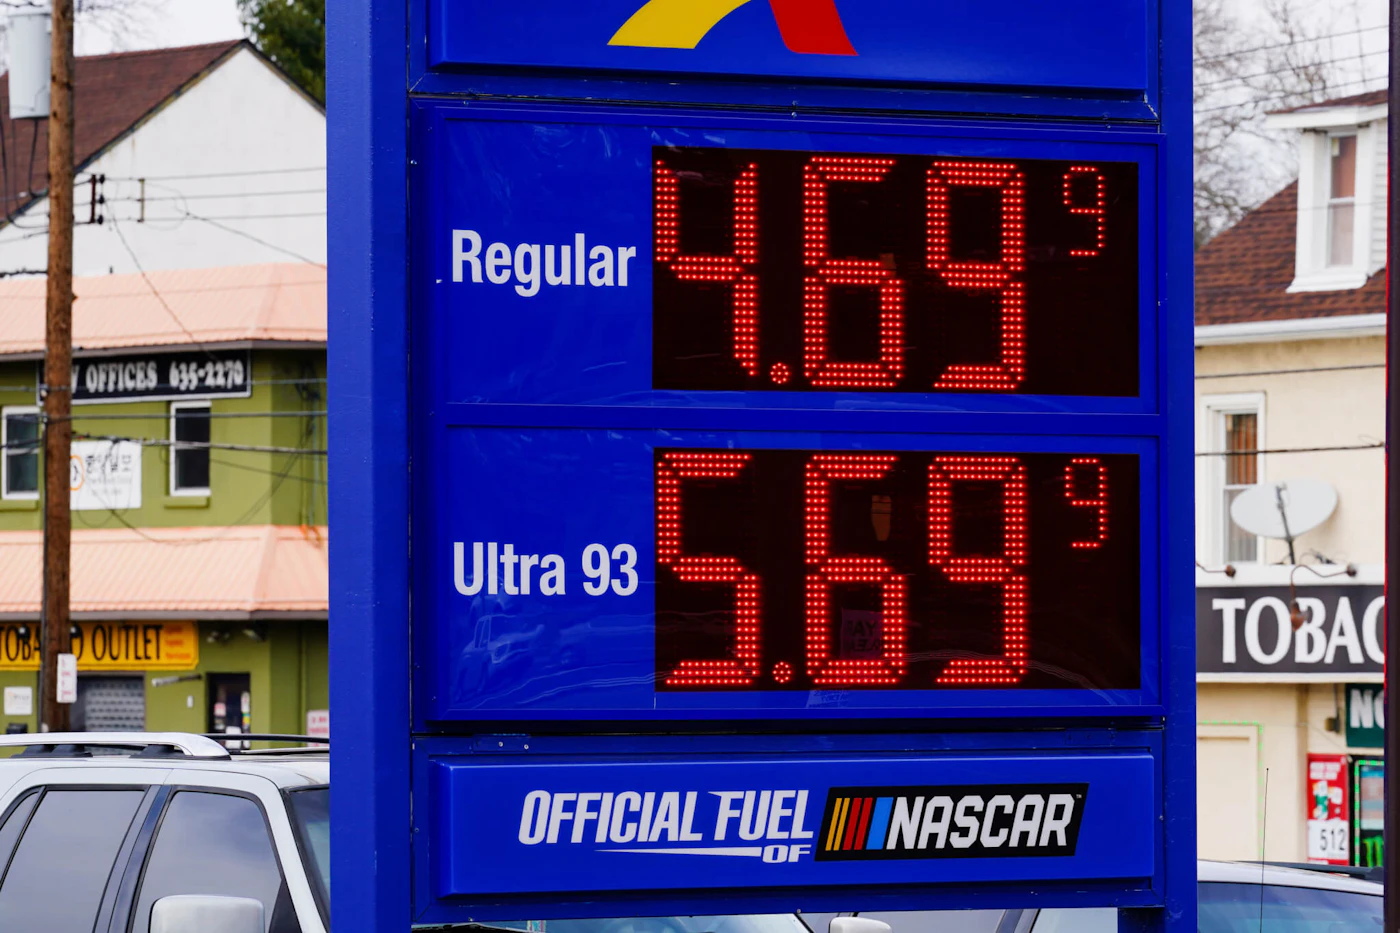 Gas prices are displayed at a filling station in Philadelphia, Thursday, March 10, 2022. (AP Photo/Matt Rourke)